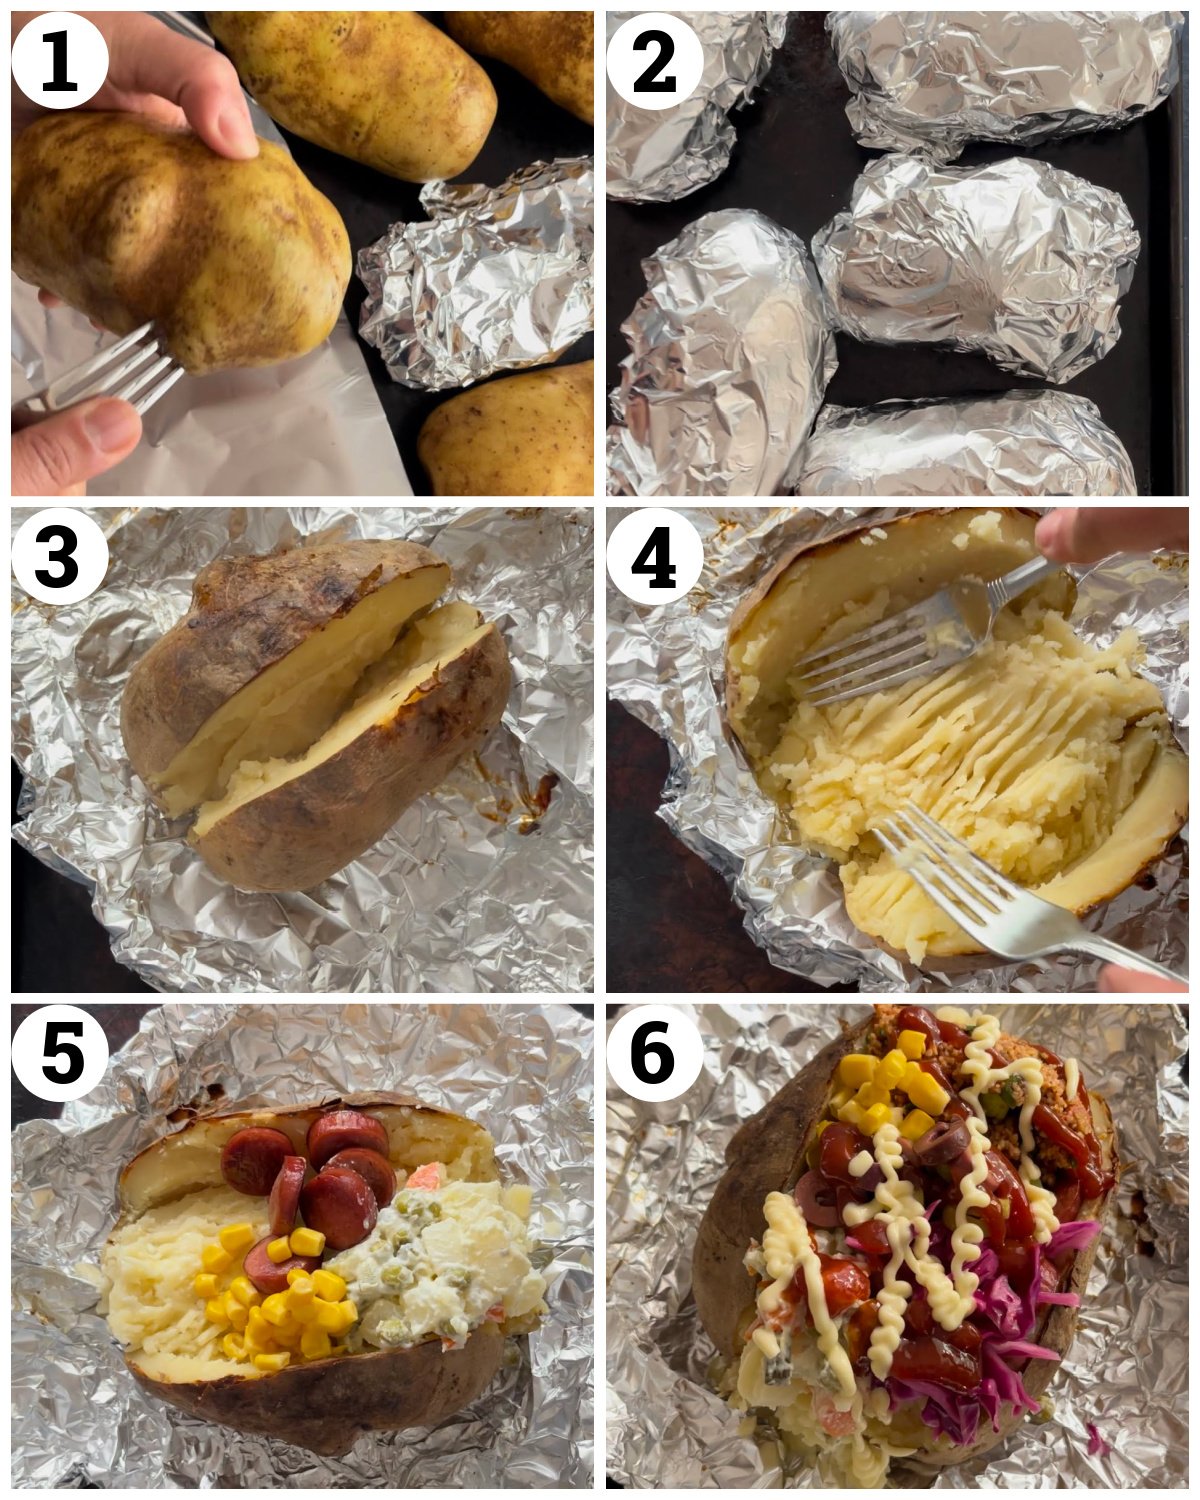 poke the potatoes and wrpa them in aluminum foil. Bake them in the oven until tender and cut open. Fluff with cheese and butter then top with your favorite toppings. 